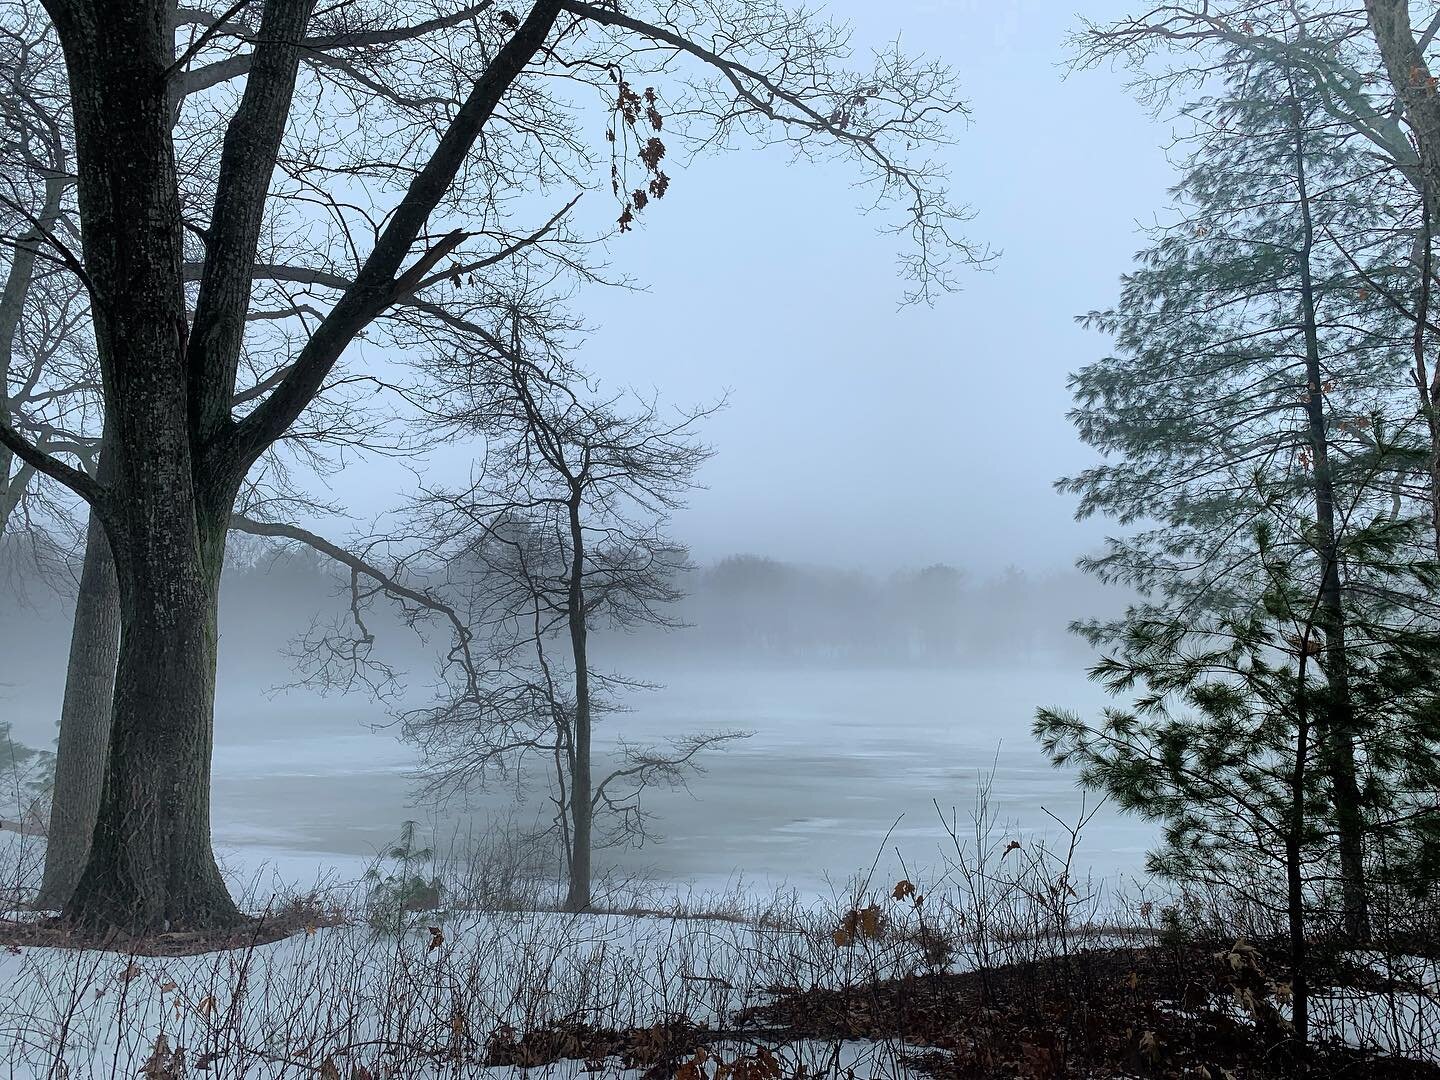 continuing the path of softening edges &mdash;
diving into my own deepest mysteries
dissolving boundaries between me and the sacred other
intuition be my guide
every step a prayer
seeing beauty in the smallest things
dreaming awake.

#fog #winter #me